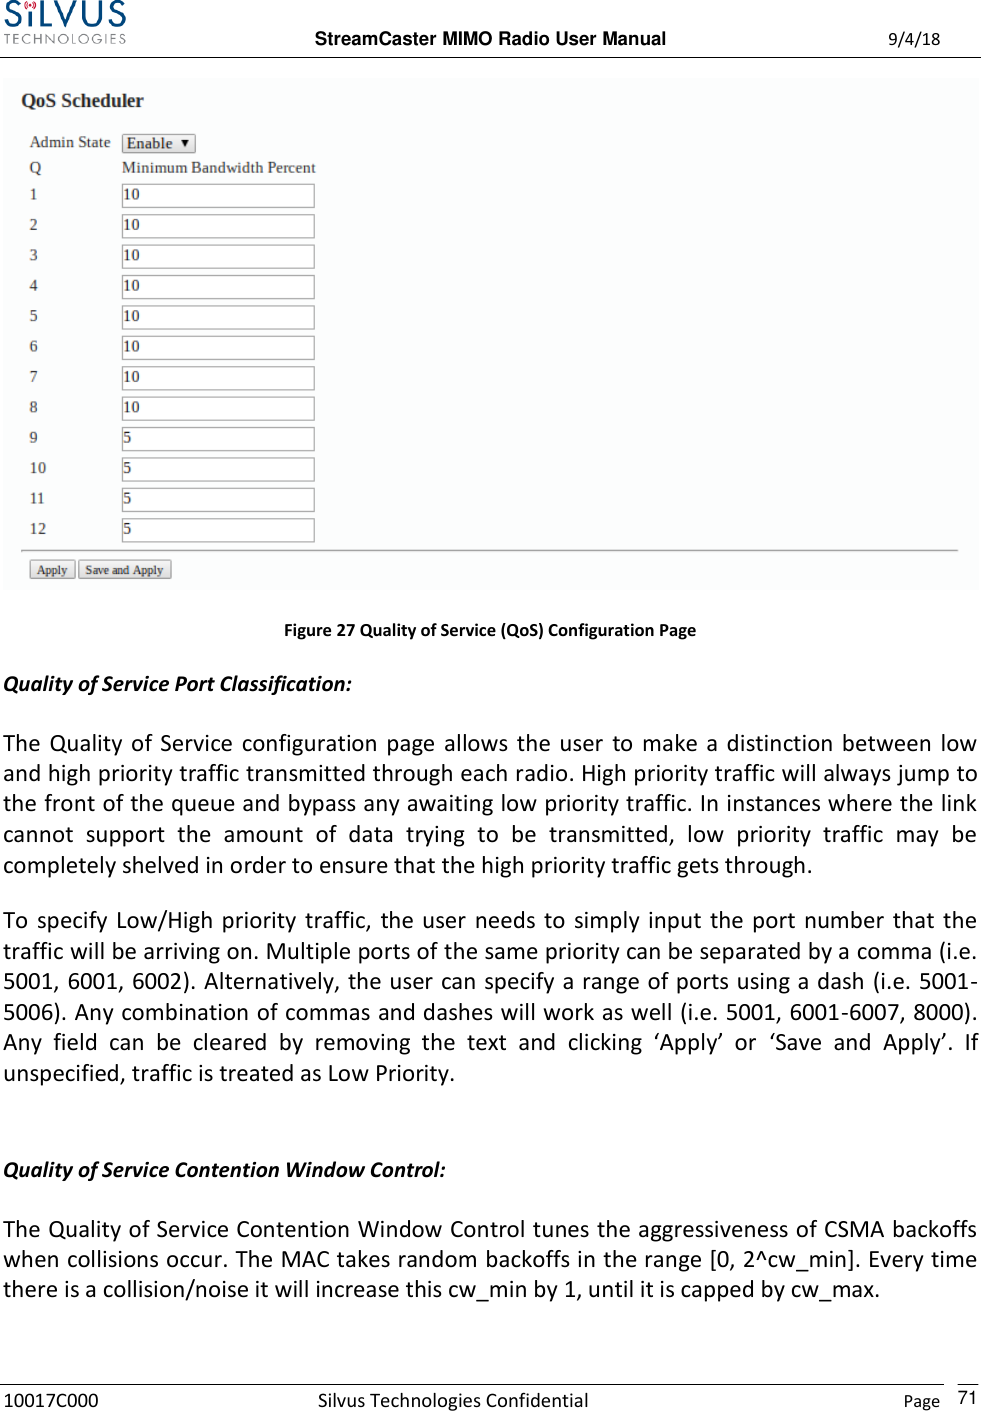  StreamCaster MIMO Radio User Manual  9/4/18 10017C000 Silvus Technologies Confidential    Page    71  Figure 27 Quality of Service (QoS) Configuration Page Quality of Service Port Classification: The  Quality  of Service  configuration page allows  the  user  to  make a distinction between  low and high priority traffic transmitted through each radio. High priority traffic will always jump to the front of the queue and bypass any awaiting low priority traffic. In instances where the link cannot  support  the  amount  of  data  trying  to  be  transmitted,  low  priority  traffic  may  be completely shelved in order to ensure that the high priority traffic gets through.   To  specify  Low/High priority  traffic,  the user  needs to  simply  input  the port  number that  the traffic will be arriving on. Multiple ports of the same priority can be separated by a comma (i.e. 5001, 6001, 6002). Alternatively, the user can specify a range of ports using a dash (i.e. 5001-5006). Any combination of commas and dashes will work as well (i.e. 5001, 6001-6007, 8000). Any  field  can  be  cleared  by  removing  the  text  and  clicking  ‘Apply’  or ‘Save  and  Apply’.  If unspecified, traffic is treated as Low Priority.  Quality of Service Contention Window Control: The Quality of Service Contention Window Control tunes the aggressiveness of CSMA backoffs when collisions occur. The MAC takes random backoffs in the range [0, 2^cw_min]. Every time there is a collision/noise it will increase this cw_min by 1, until it is capped by cw_max. 